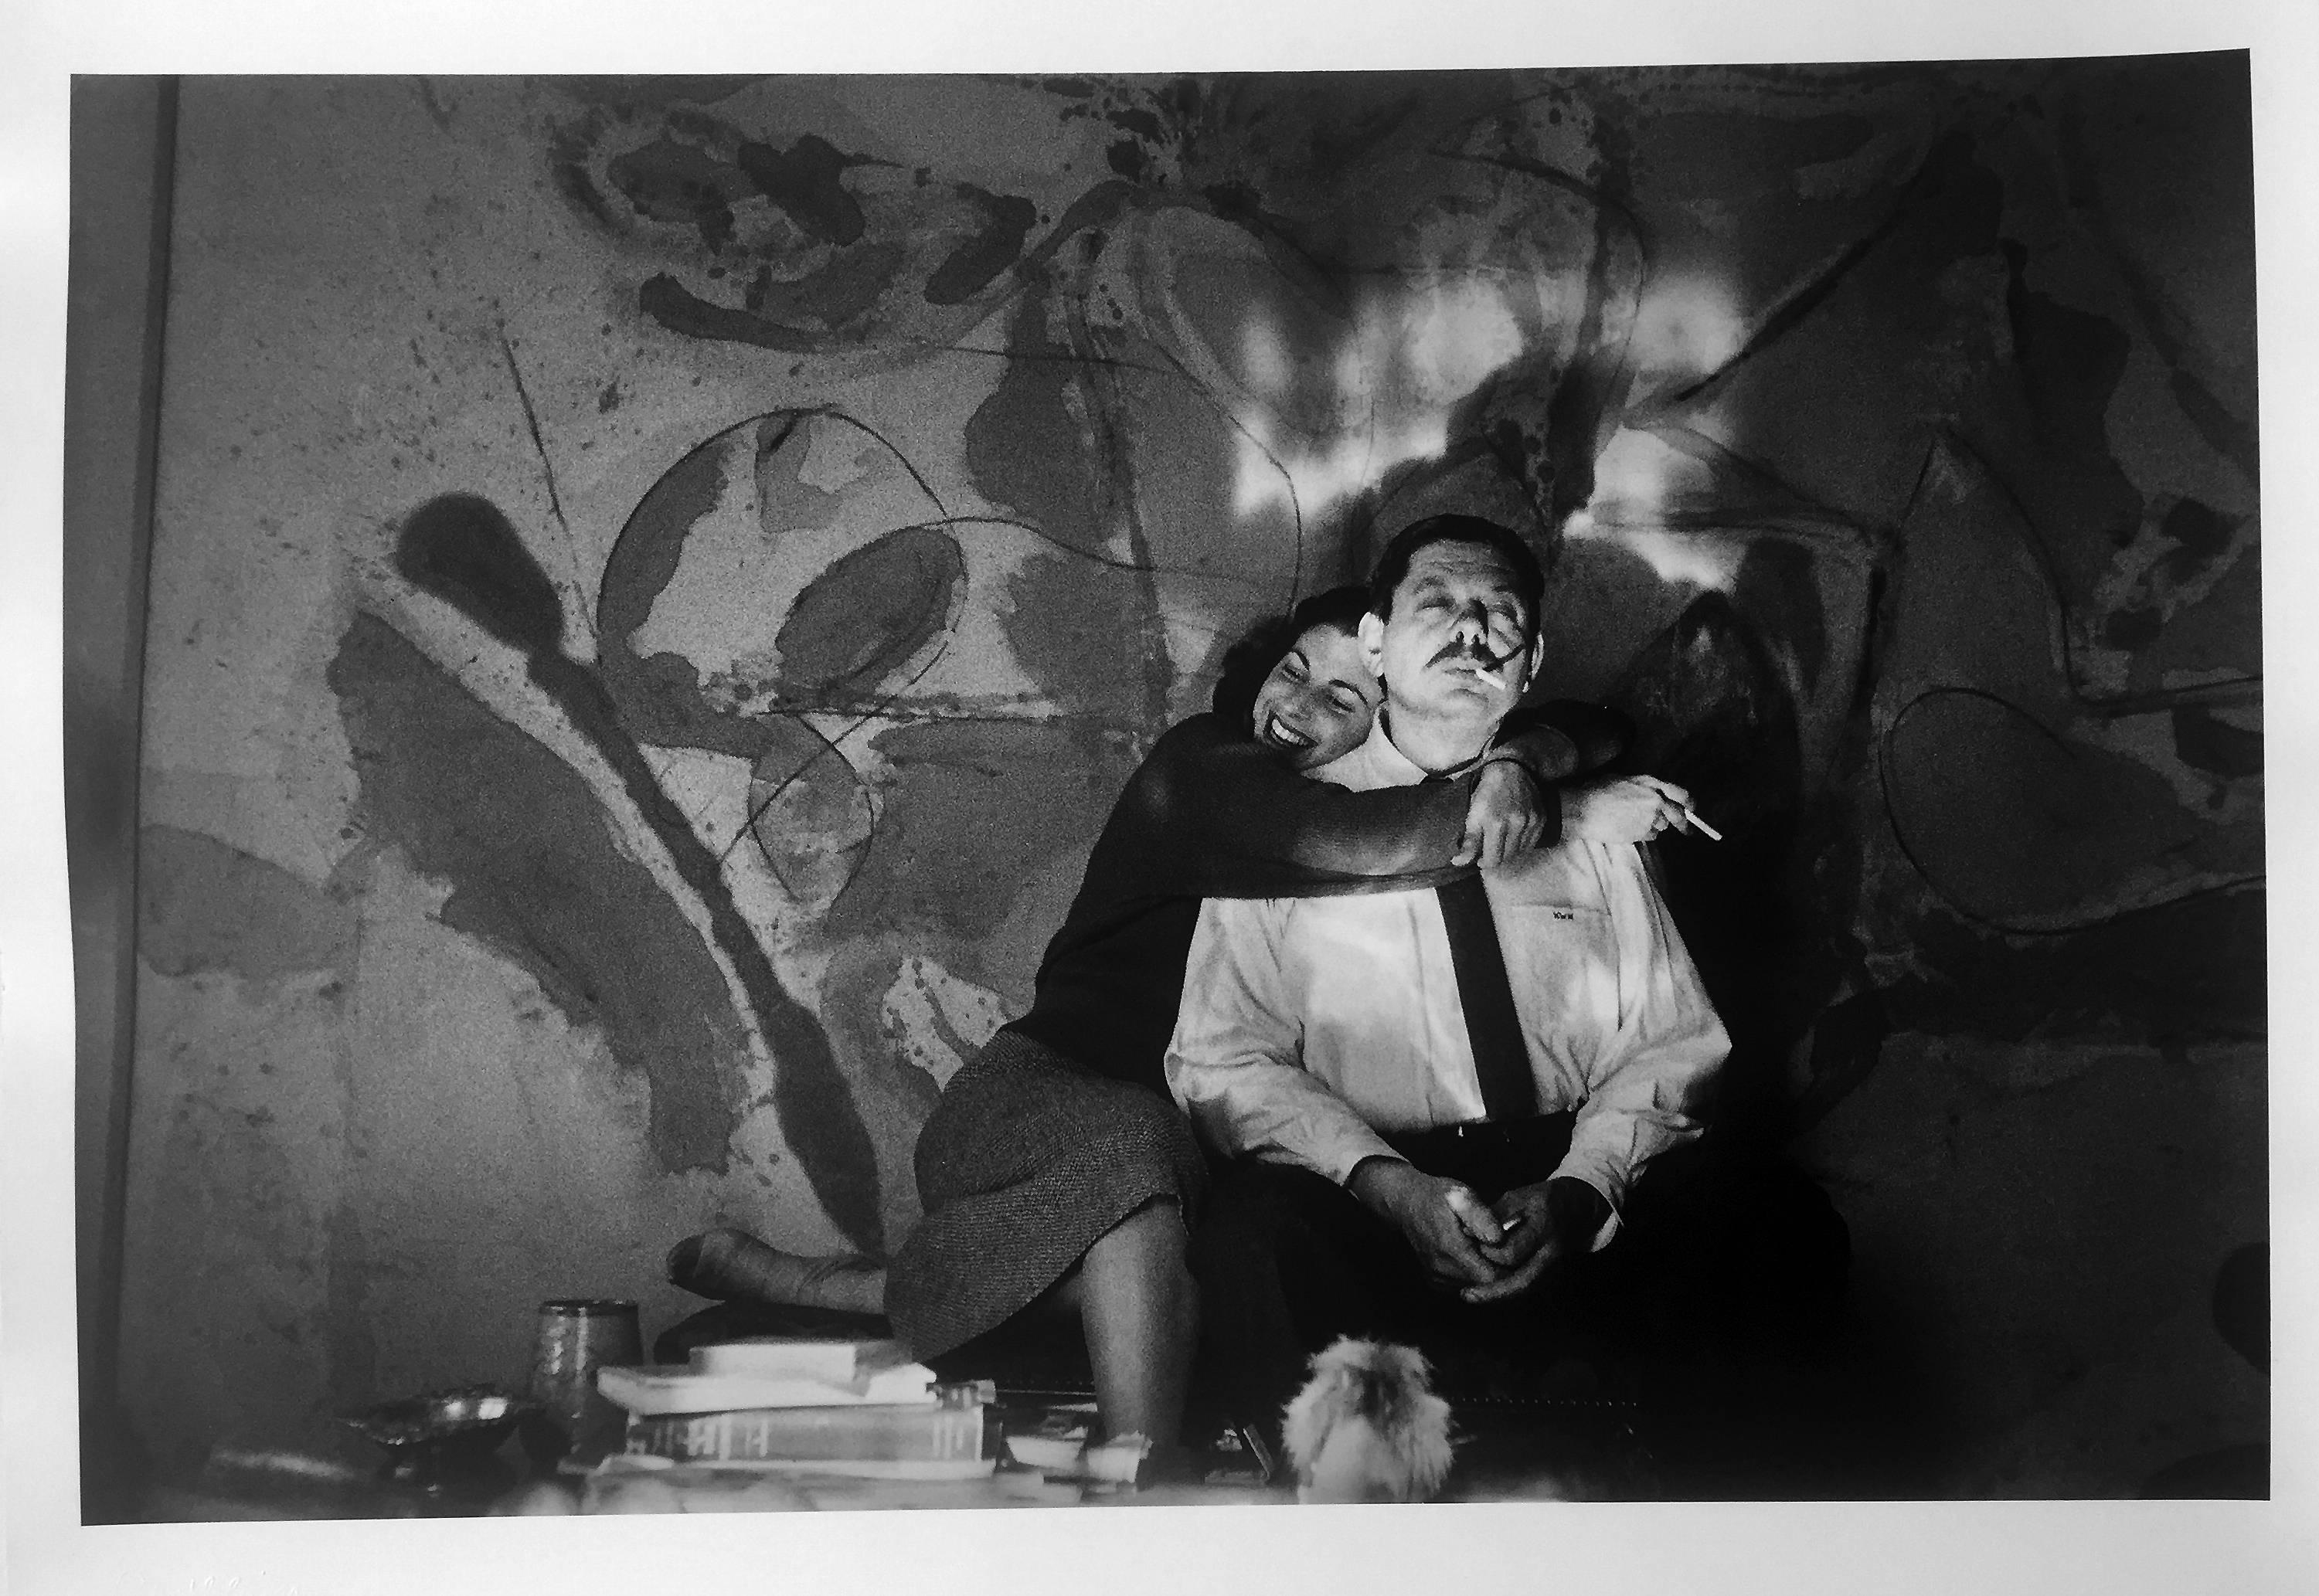 Helen Frankenthaler and David Smith, New York, Portrait of Two American Artists 